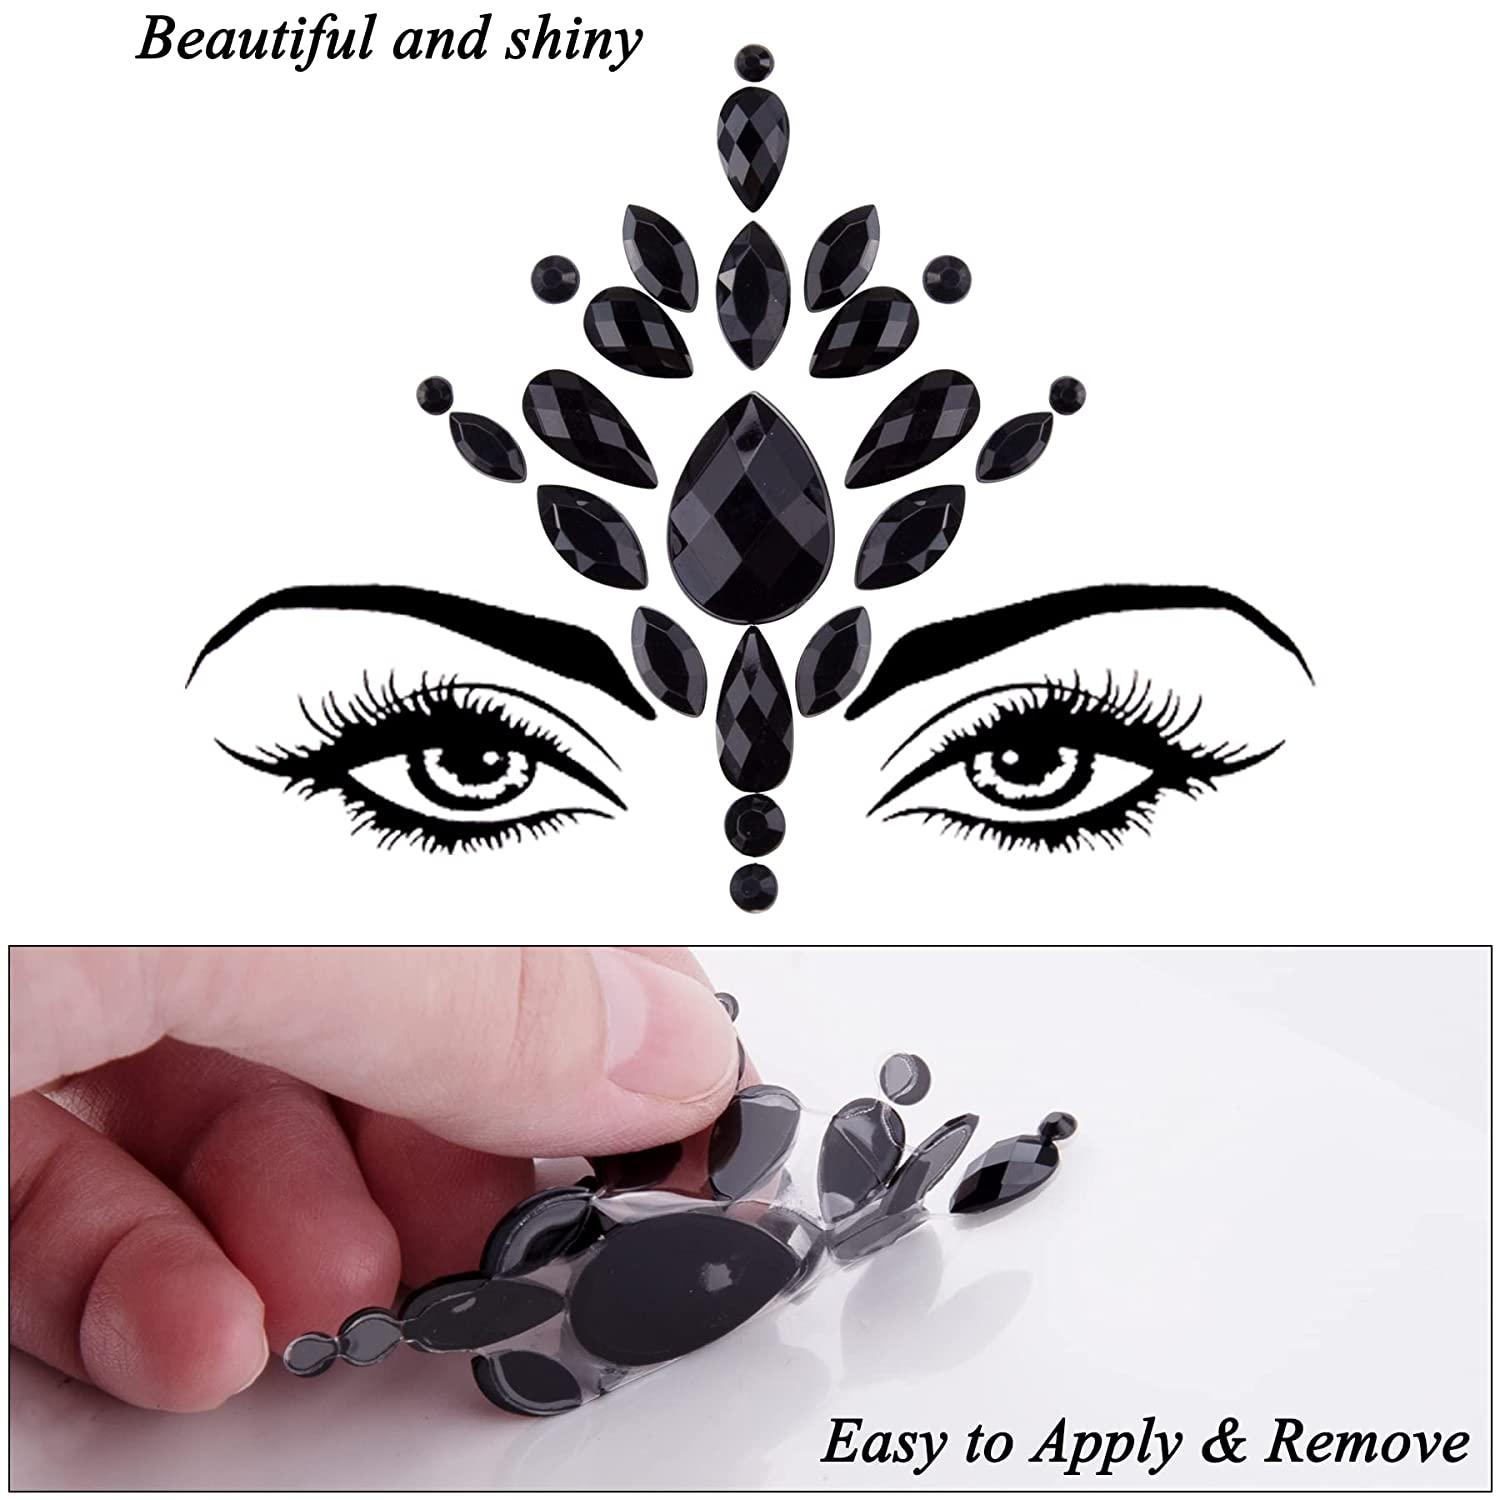 Face Jewel Stickers Adhesive Face Gems Rhinestone Jewels Party